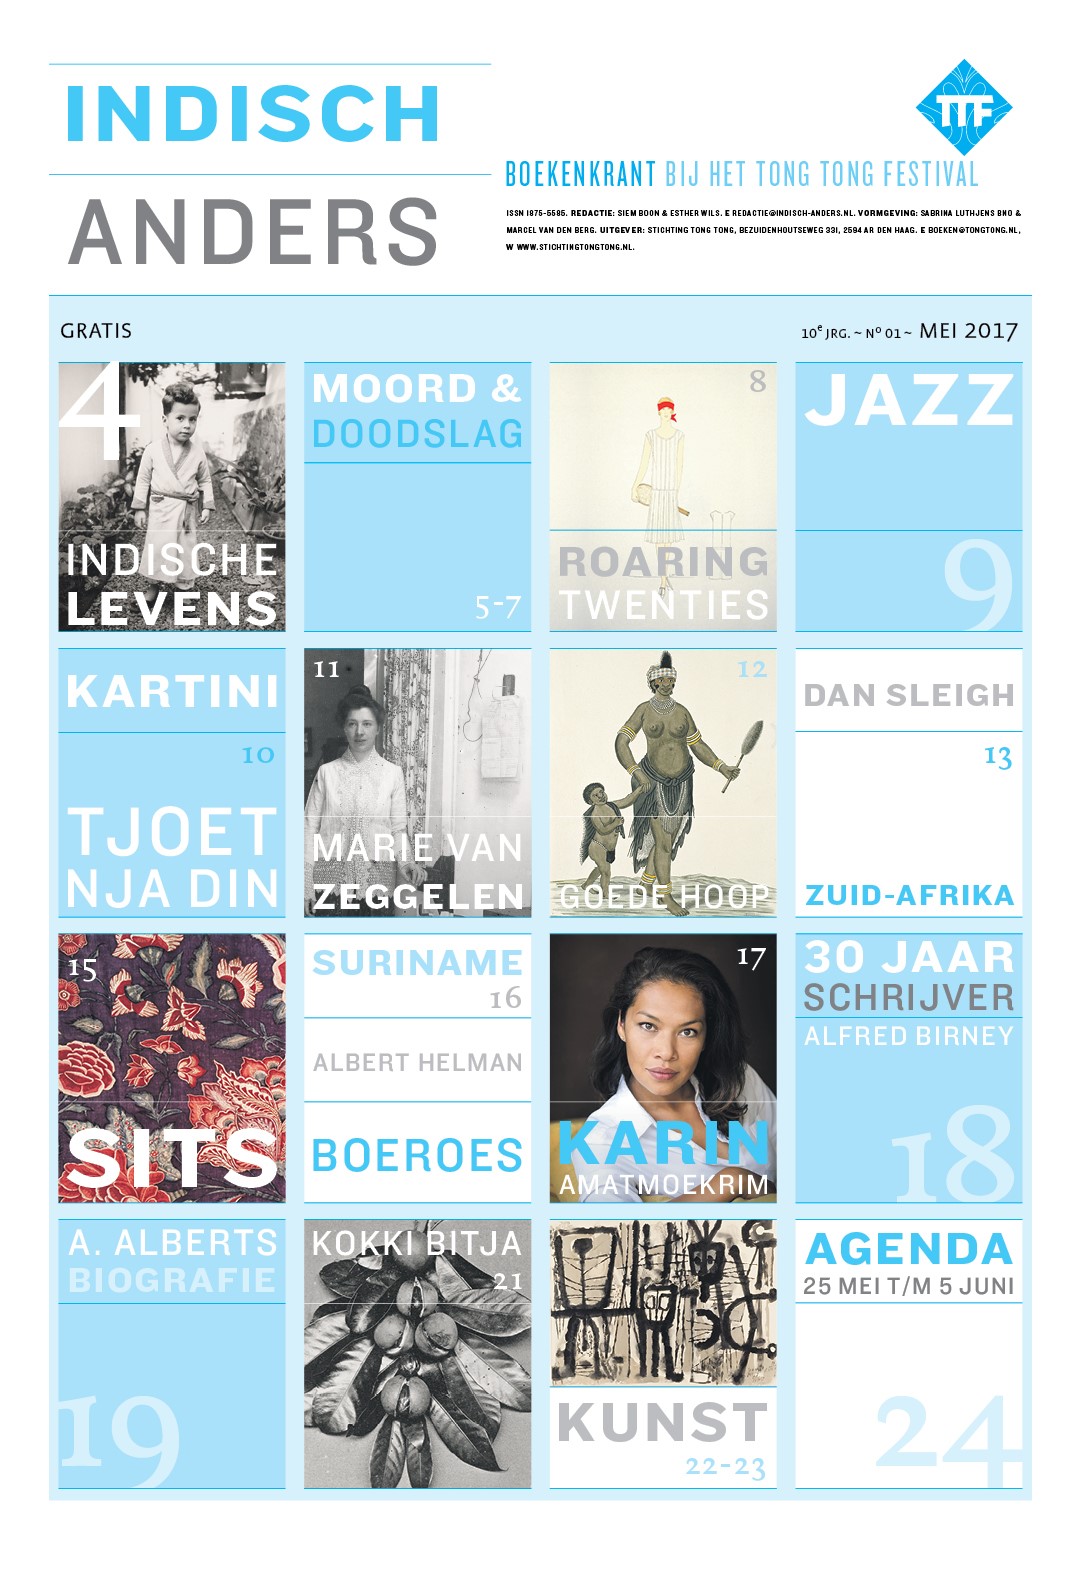 Indisch_Anders_cover_2014_Tong Tong Fair_web